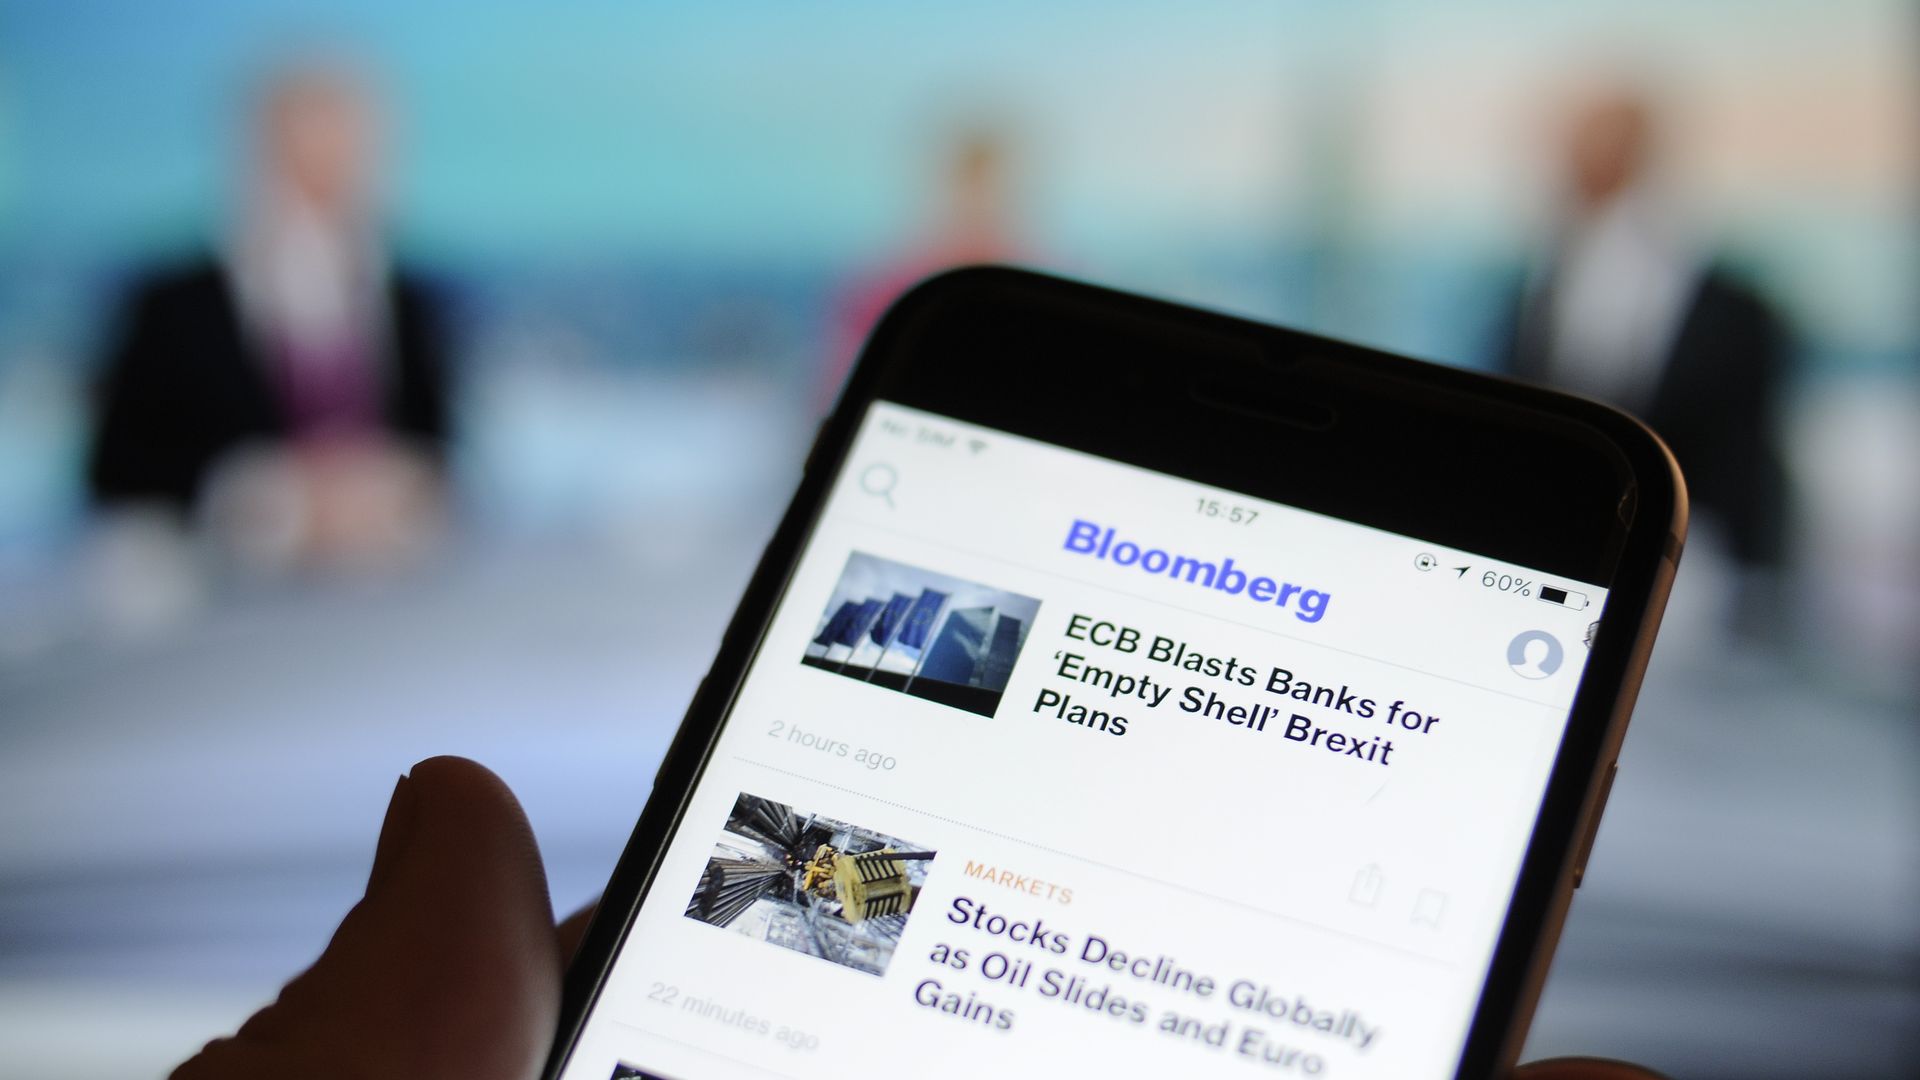 The Bloomberg news app on an iPhone